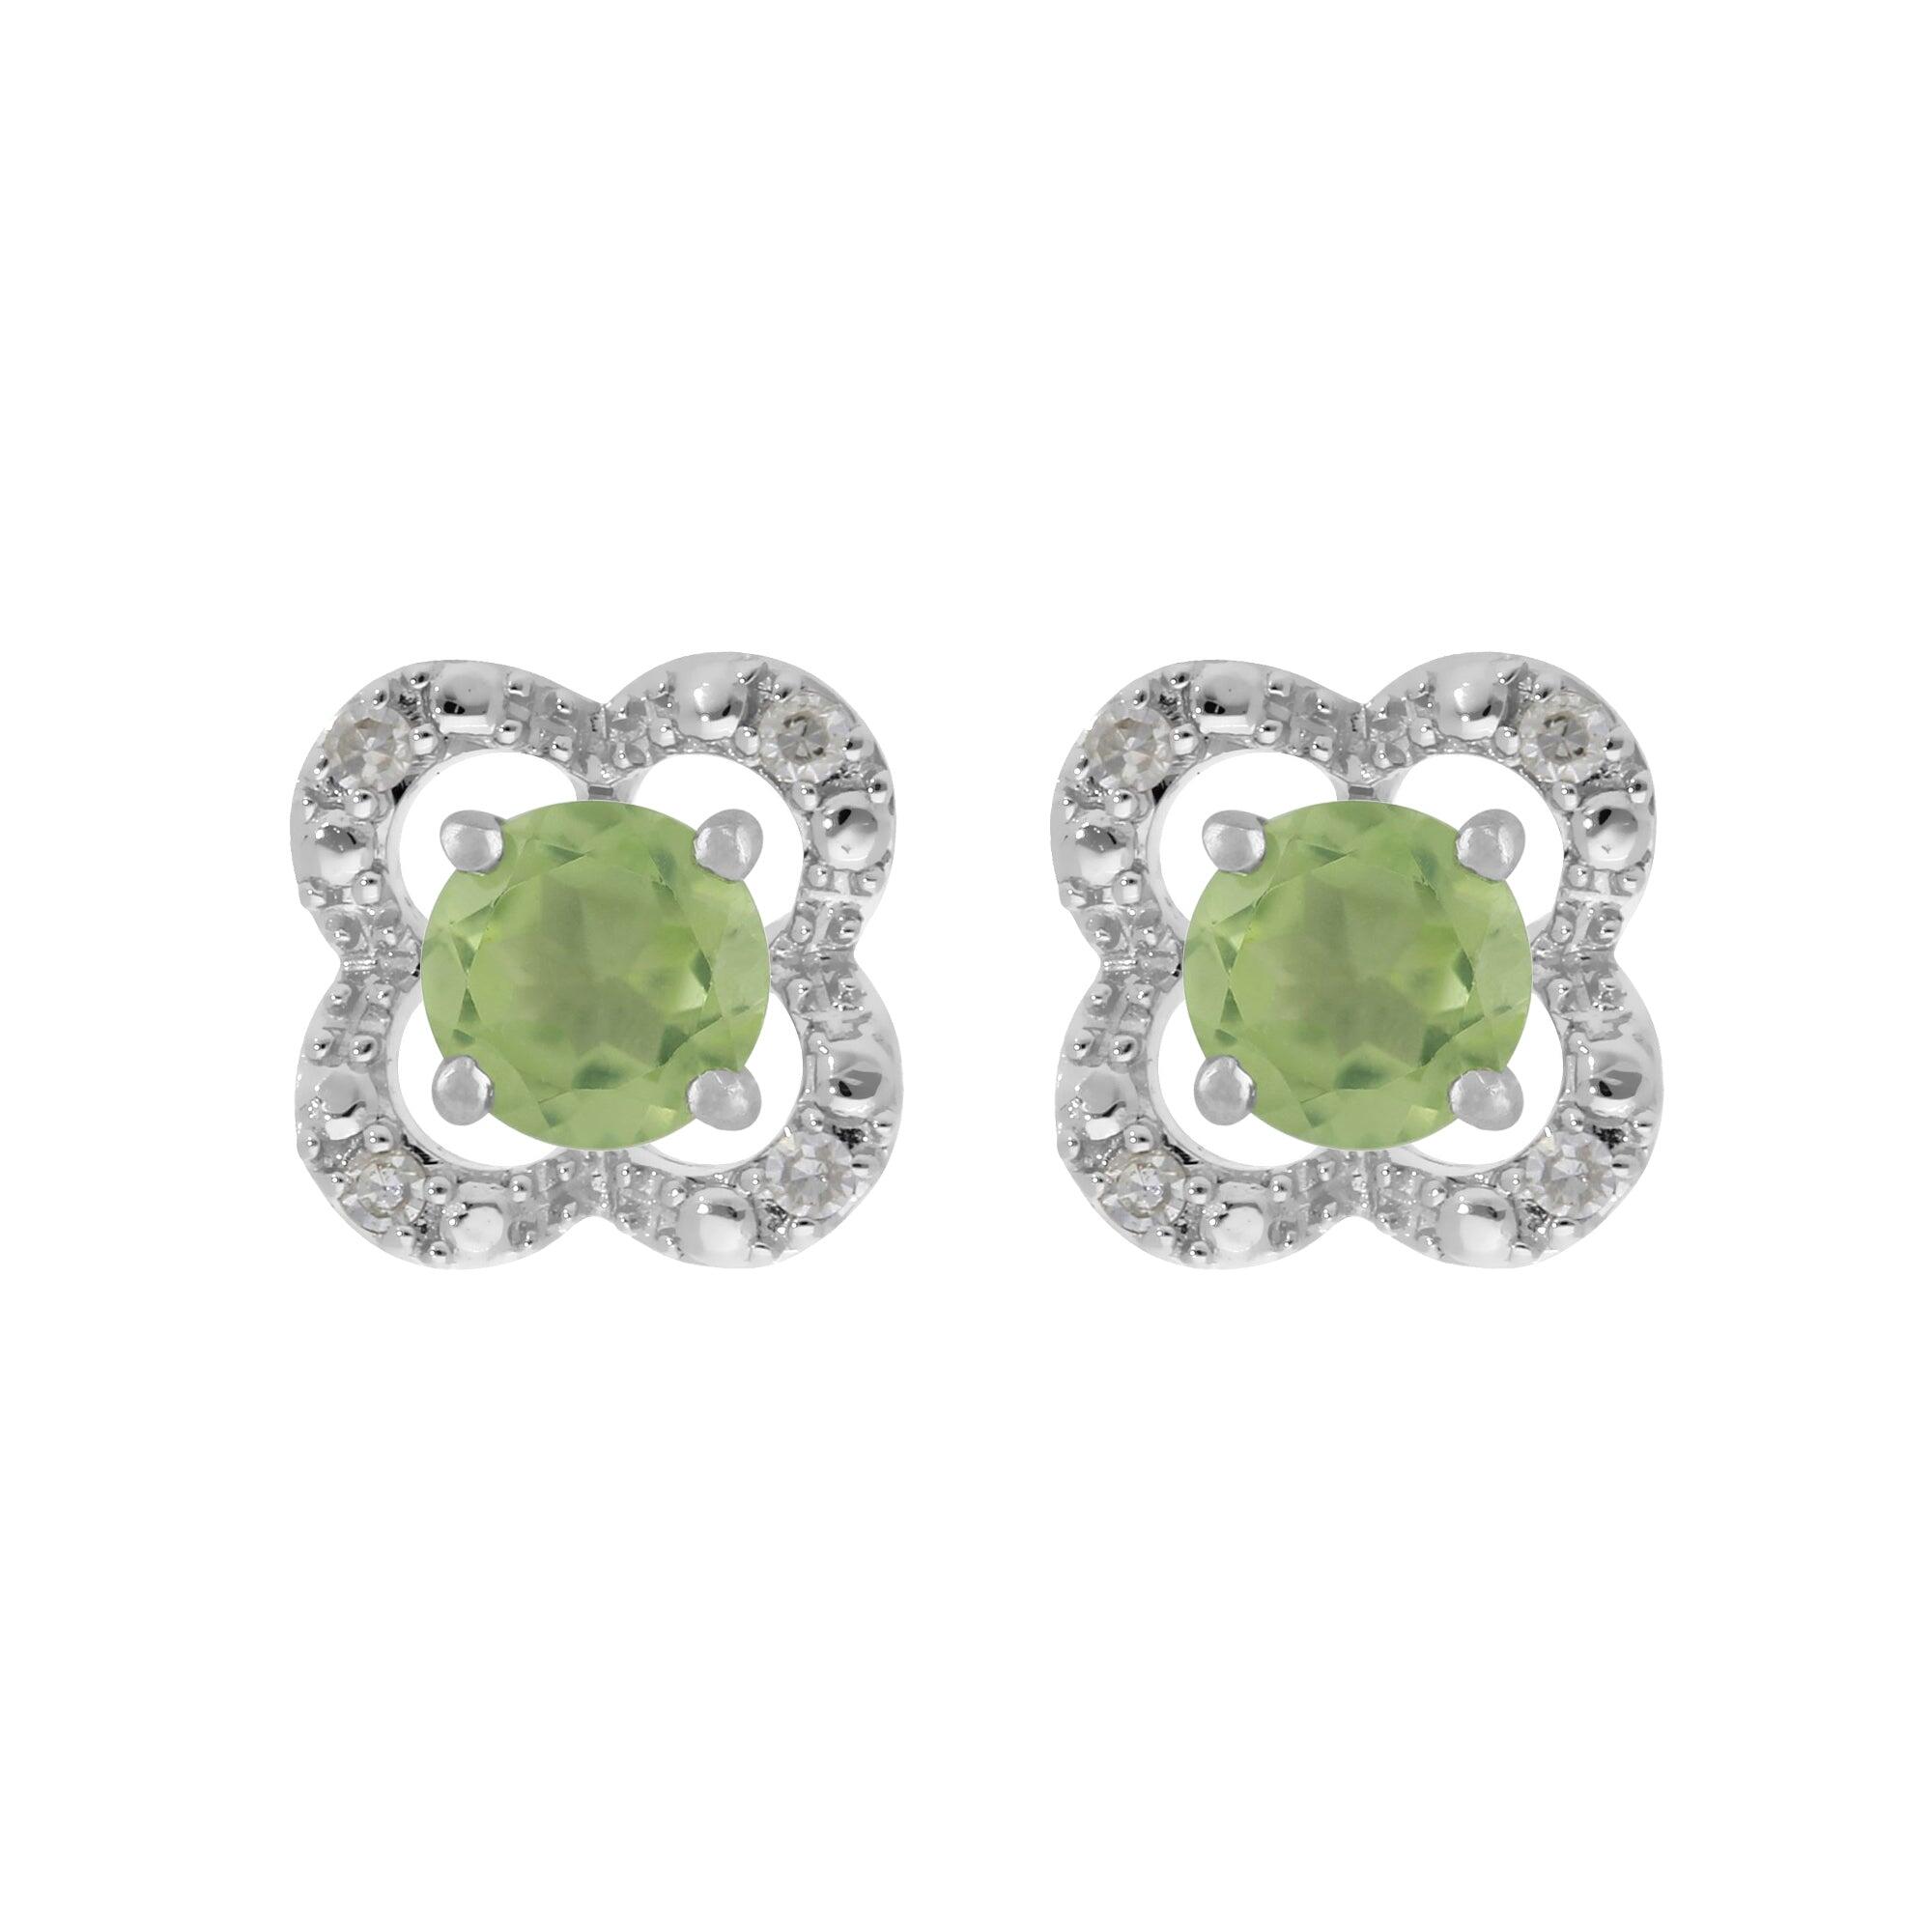 Classic Round Peridot Stud Earrings with Detachable Diamond Flower Ear Jacket in 9ct White Gold